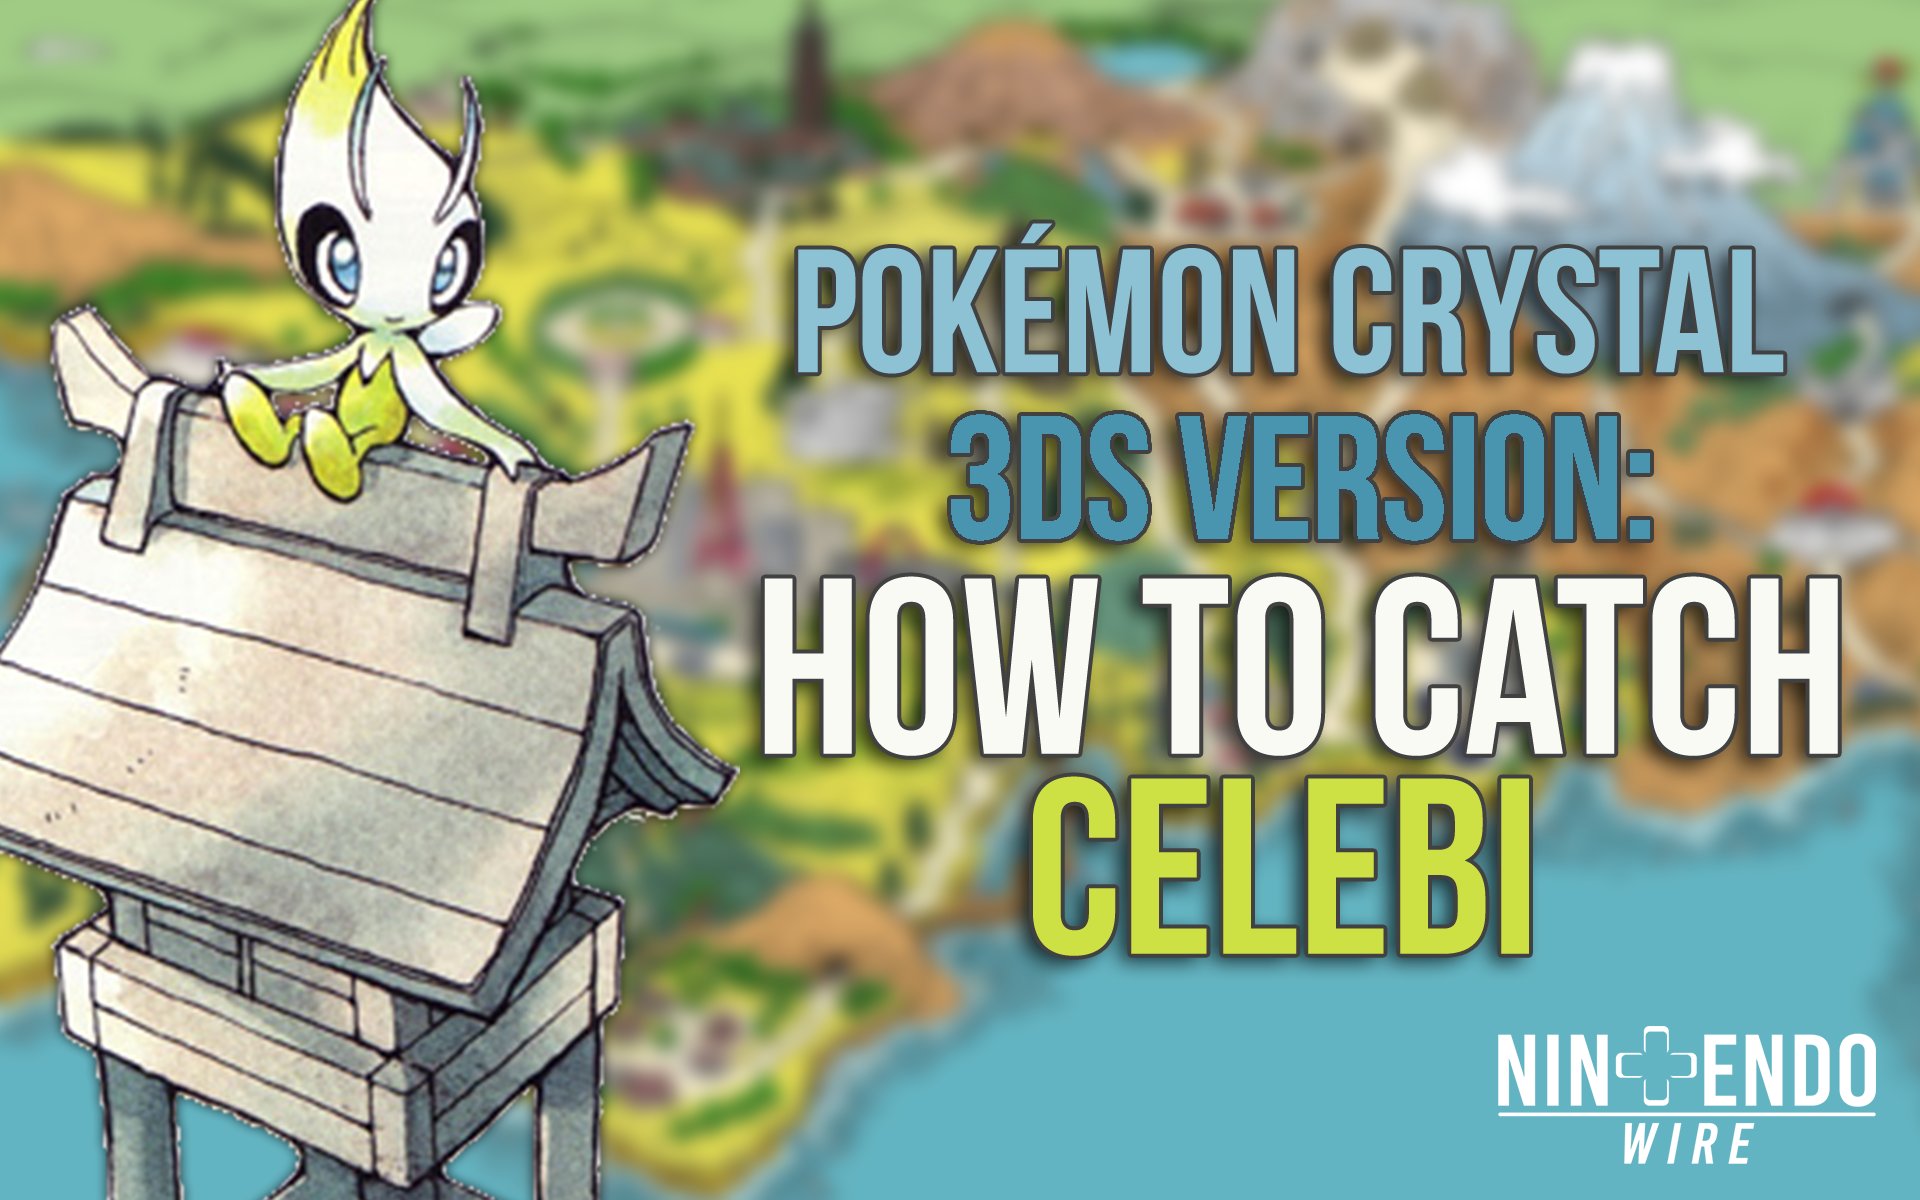 Nintendo Wire Did You Know Celebi Can Be Legitimately Caught In The 3ds Virtual Console Re Release Of Pokemoncrystal Learn How To Obtain The Gs Ball And Get Your Hands On